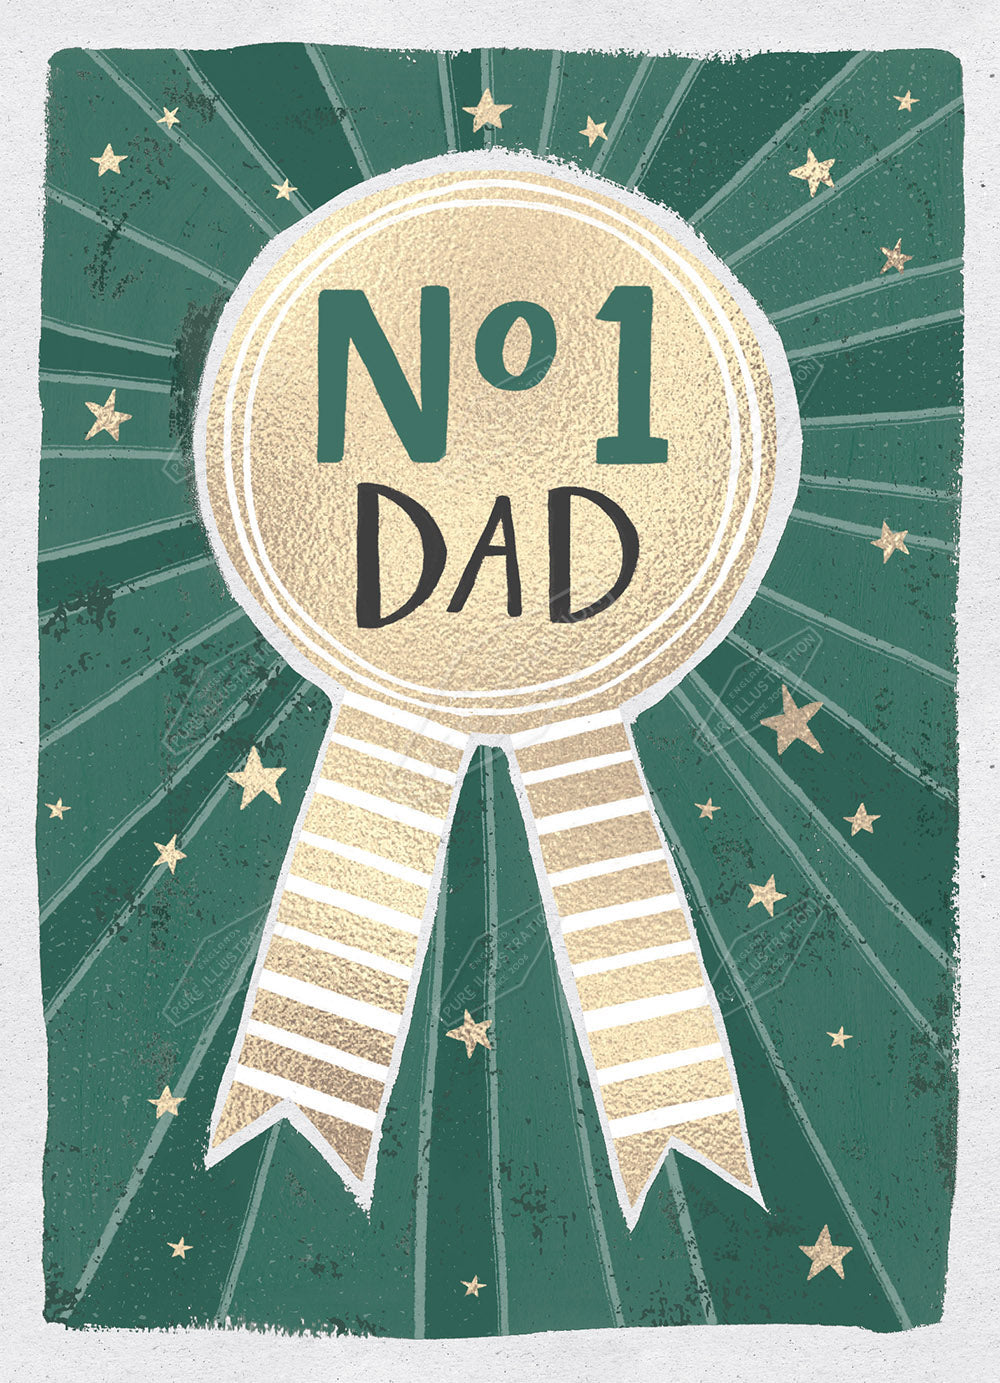 00034553KSP- Kerry Spurling is represented by Pure Art Licensing Agency - Father's Day Greeting Card Design